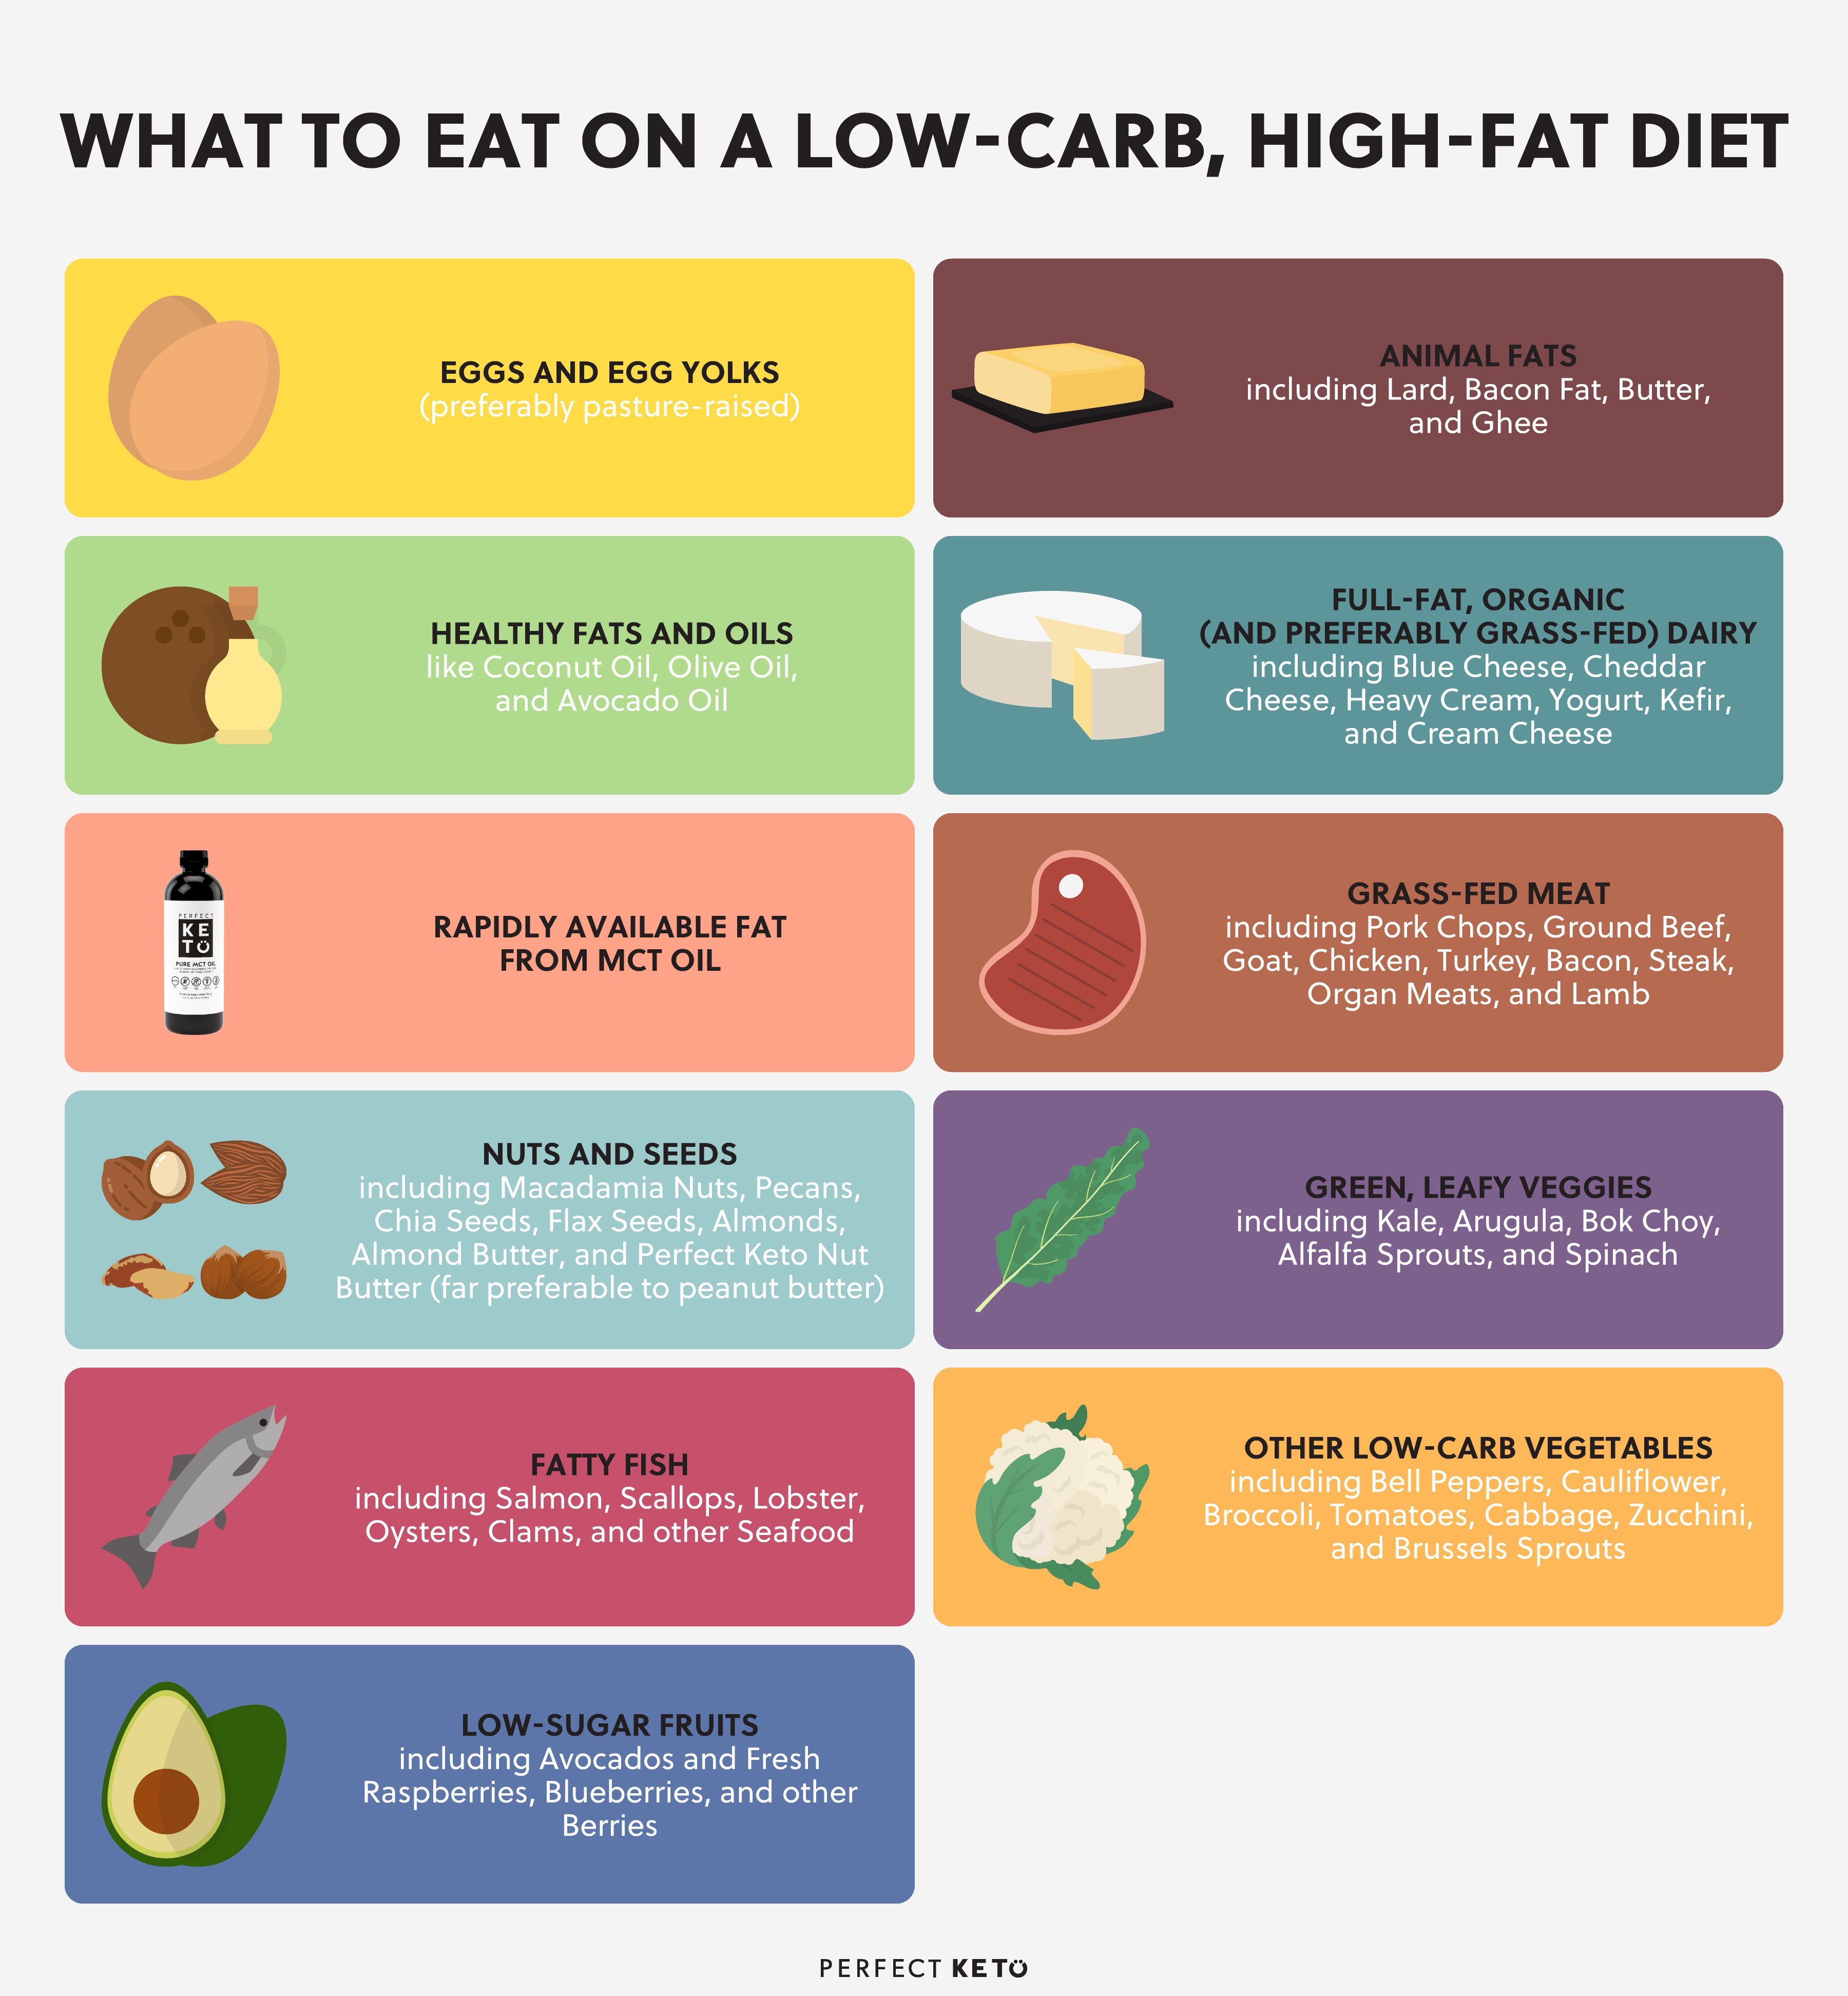 what-to-eat-on-a-low-carb-high-fat-diet.jpg